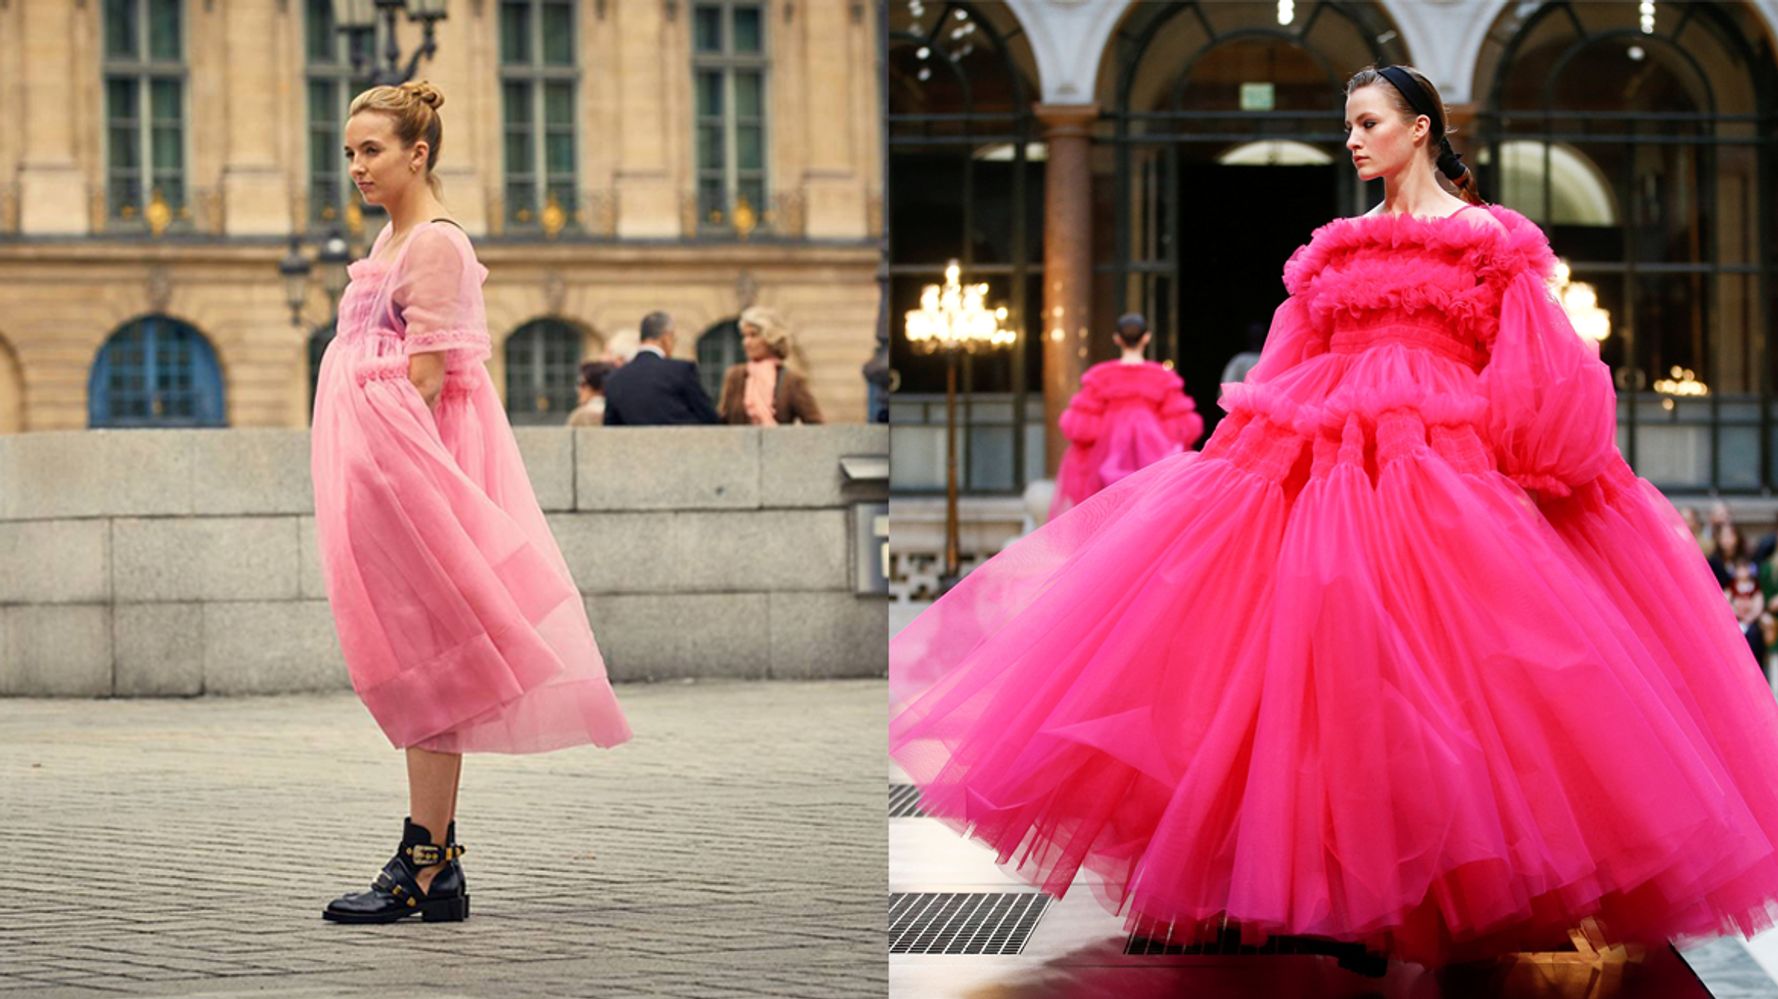 Killing Eve Tulle Dress Inspiration How To Get The Molly Goddard Look Huffpost Uk Life